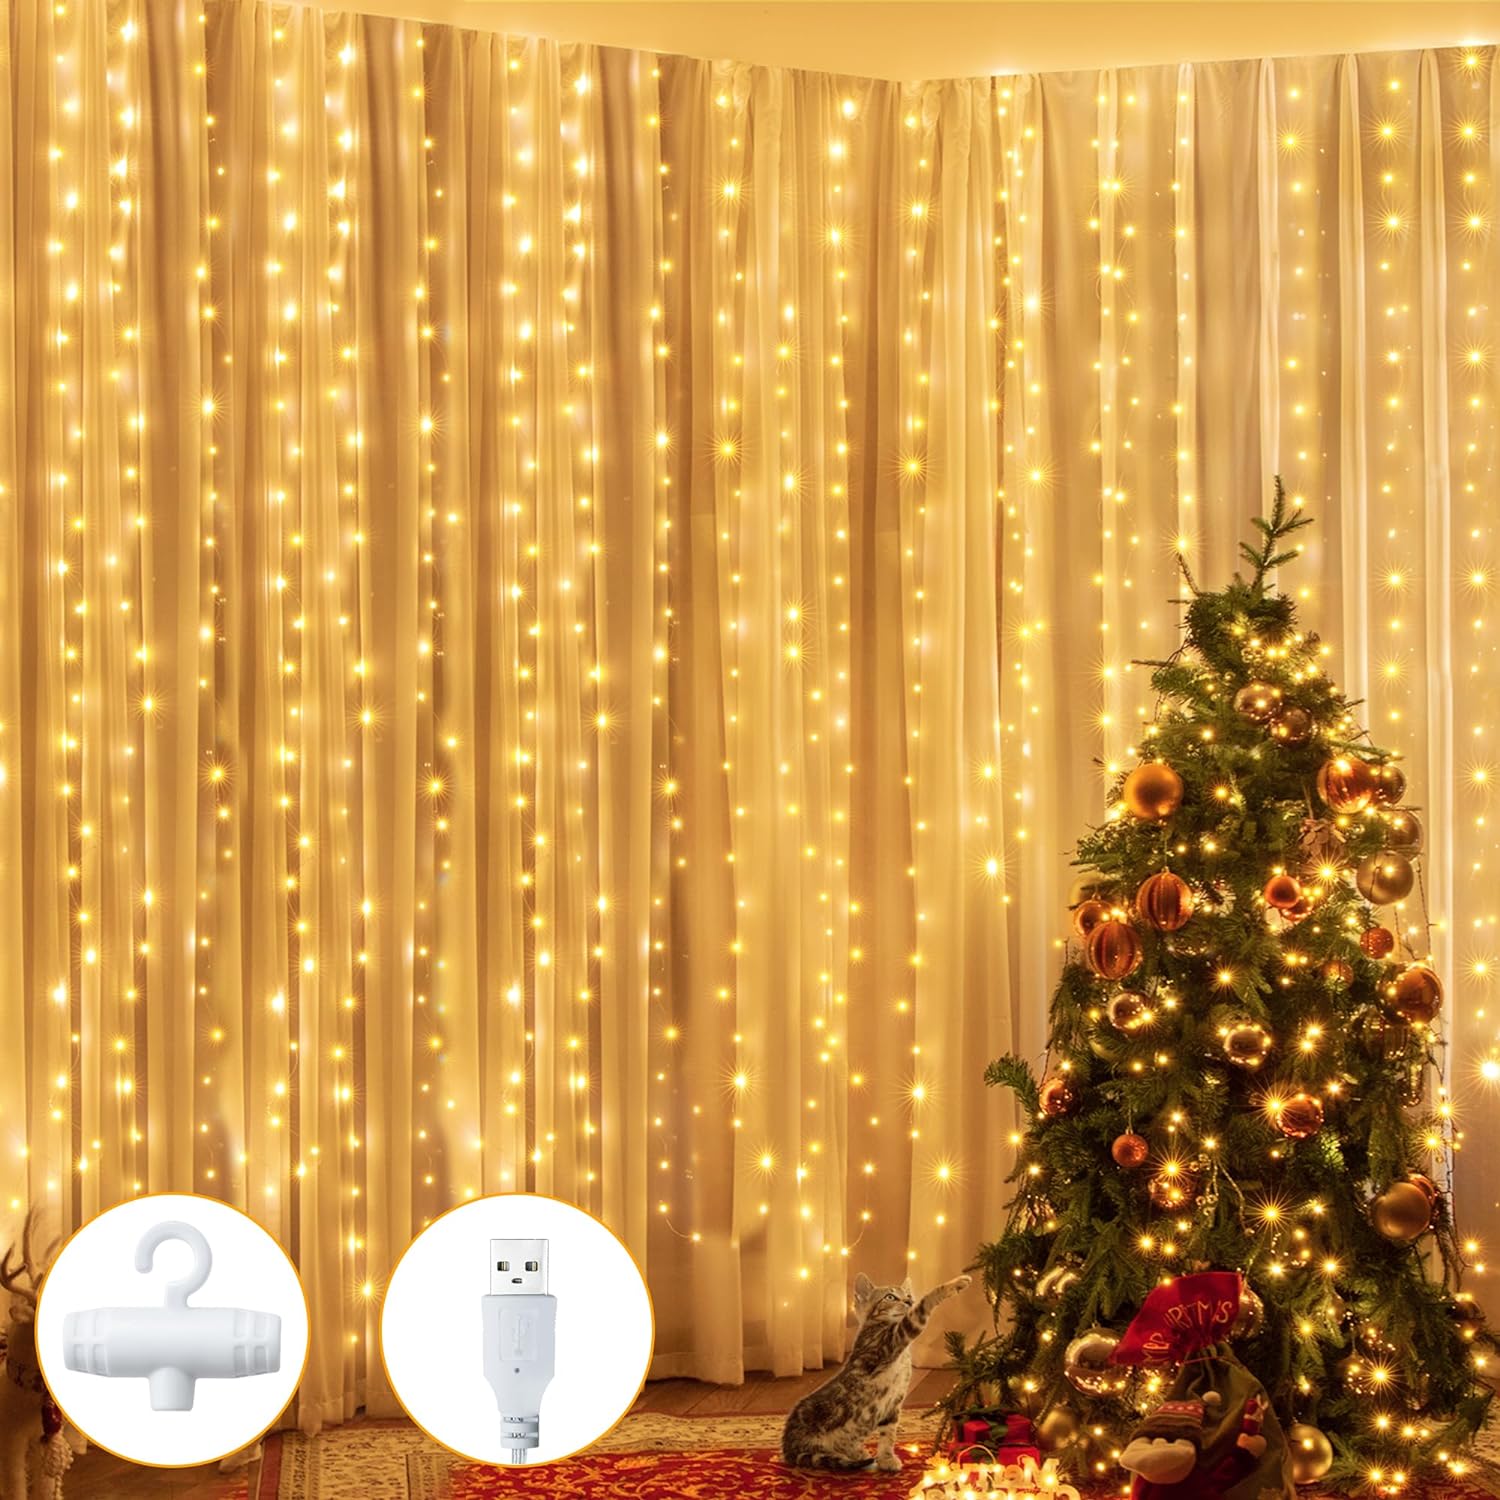 Ollny Fairy Lights Curtain 200 LED 6.6x6.6ft, USB Warm White Hanging Lights with Hook, Waterproof Window Lights for Bedroom Backdrop Wall Outdoor Indoor Backdrop Decoration